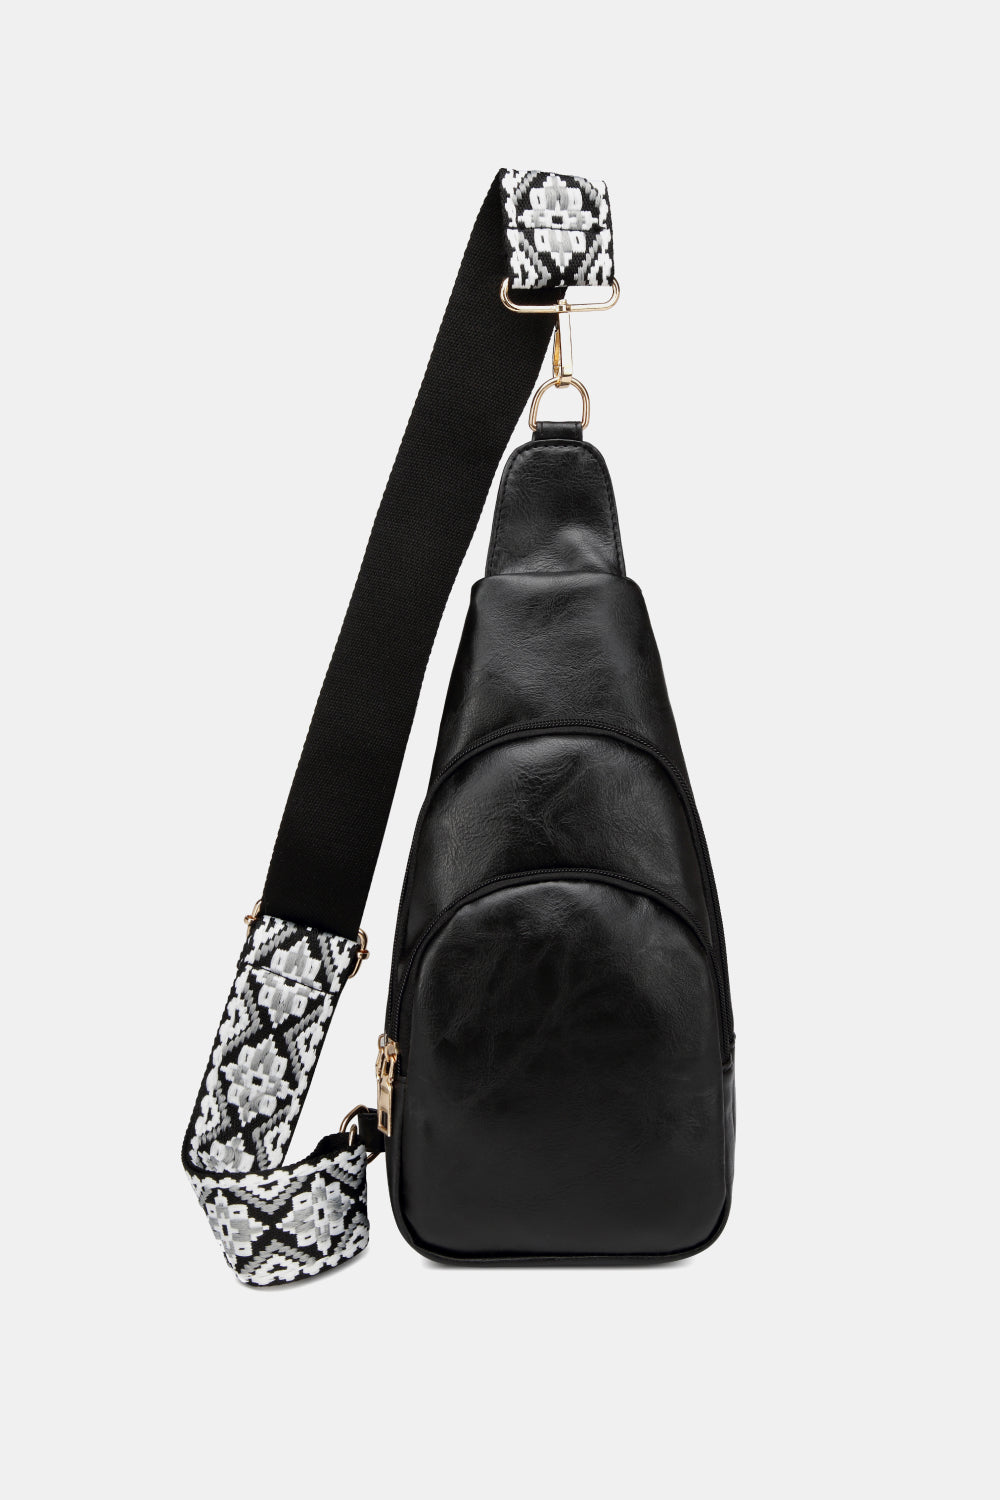 PU Leather Sling Bag [Additional Options Available]